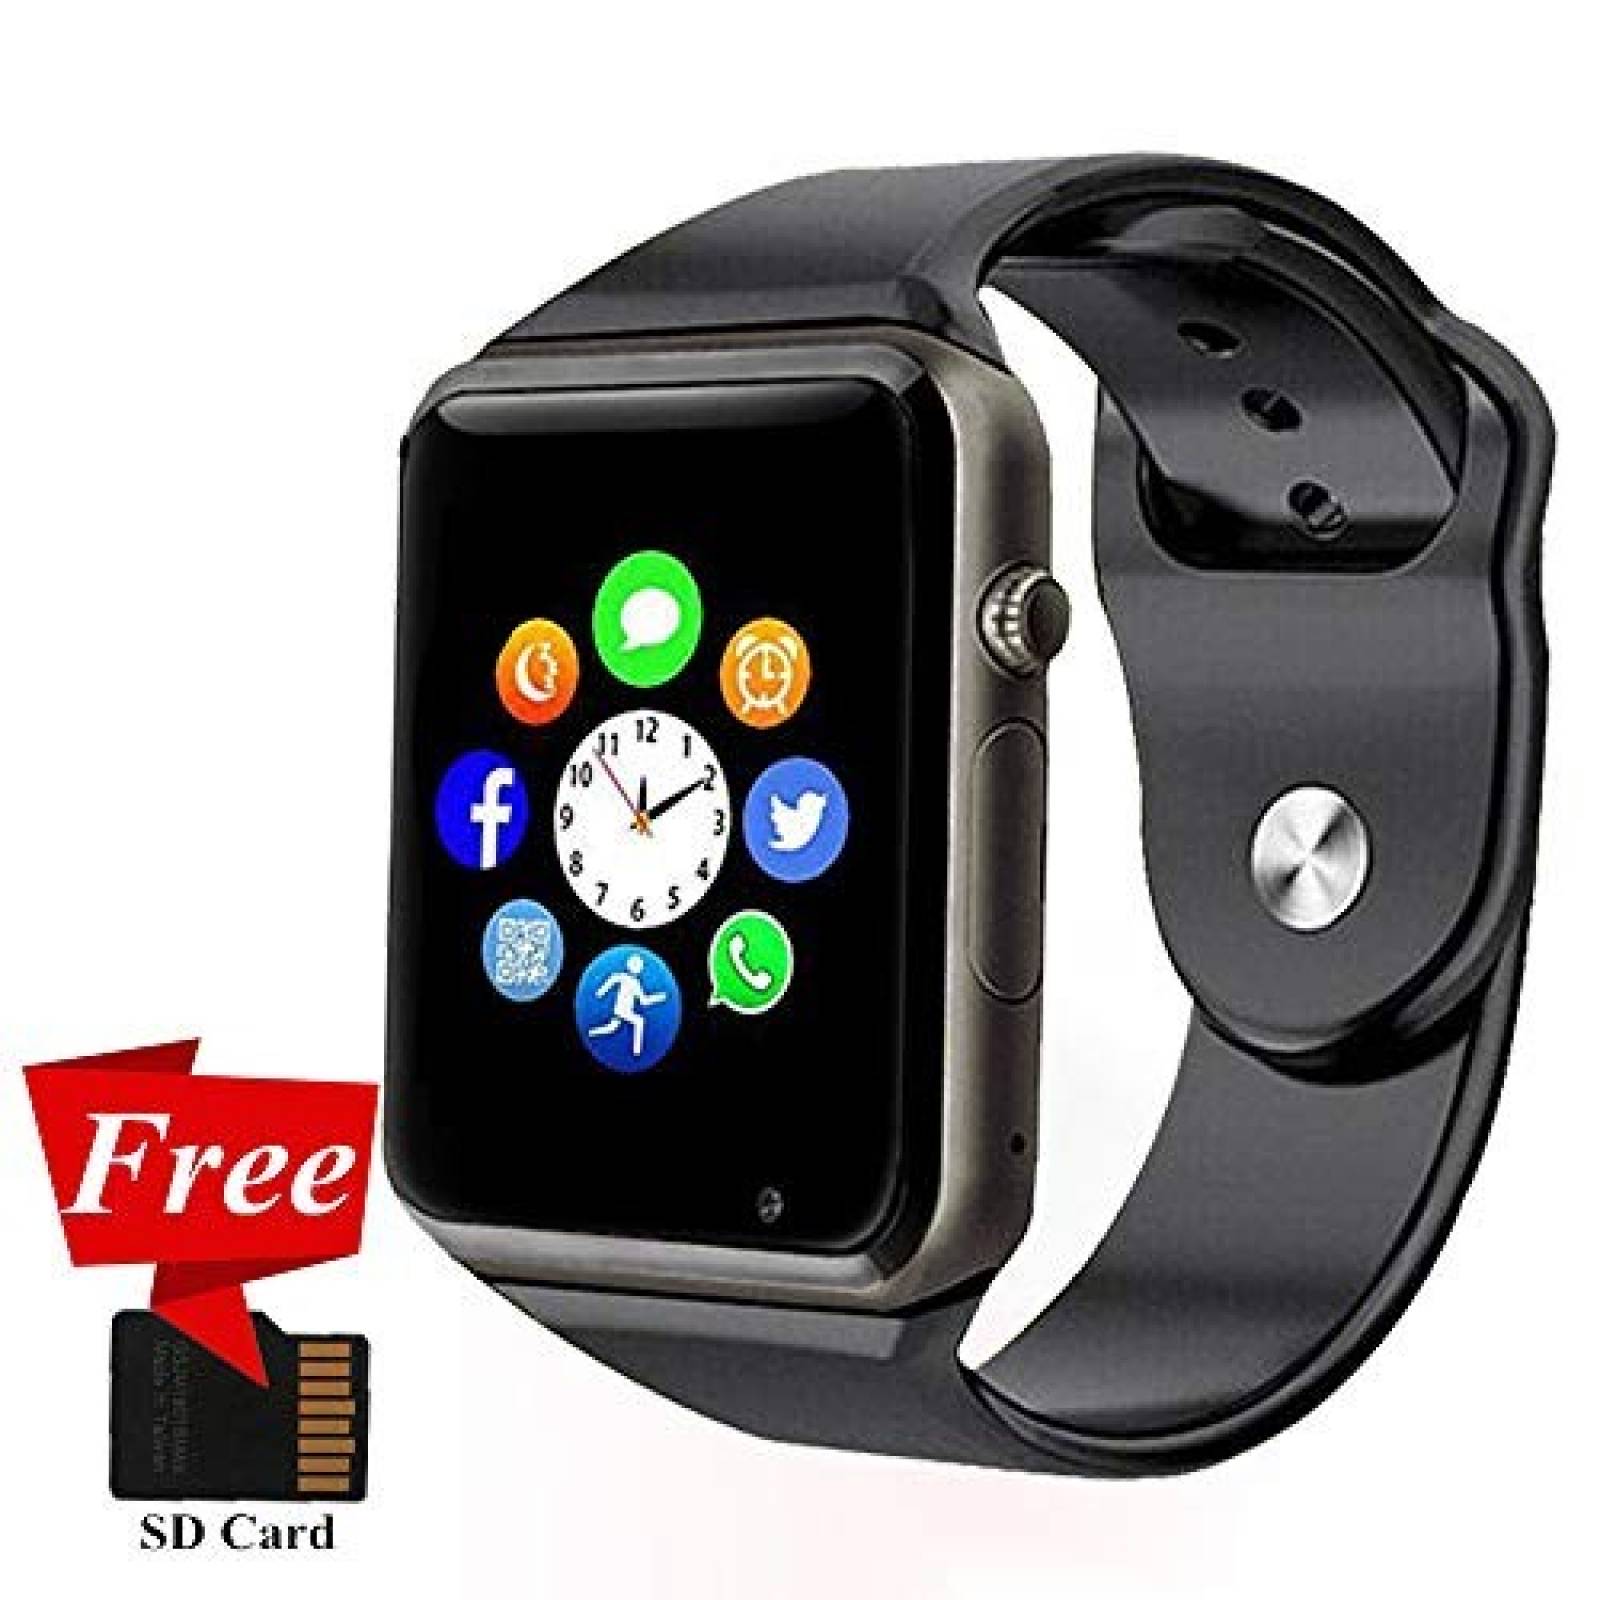 Smartwatch Janker SIM Android iOS -negro